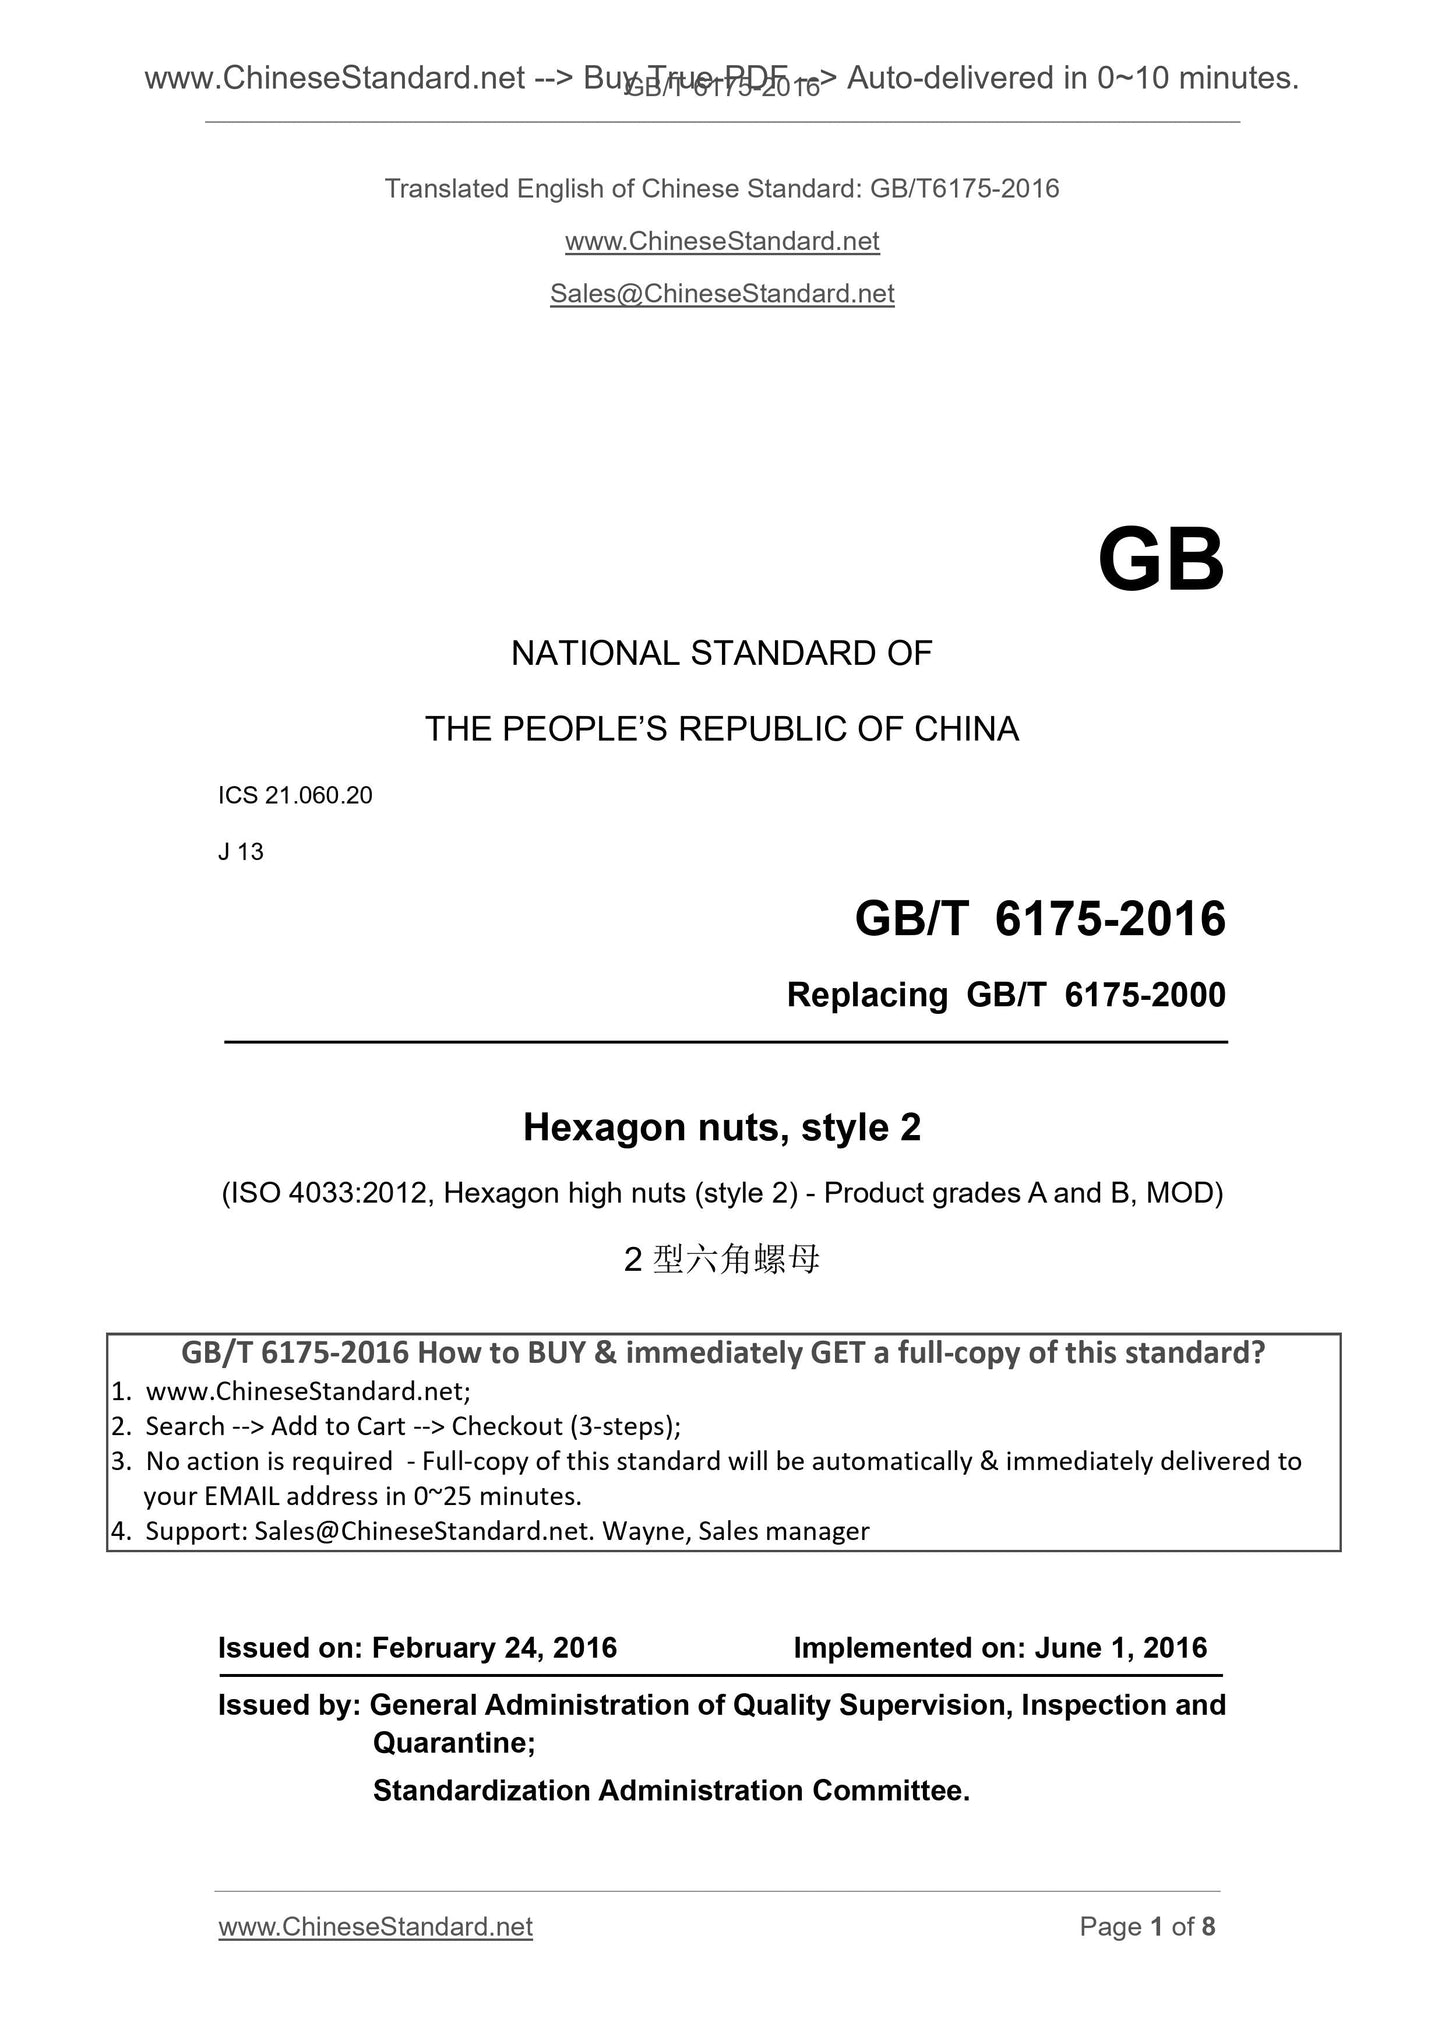 GB/T 6175-2016 Page 1